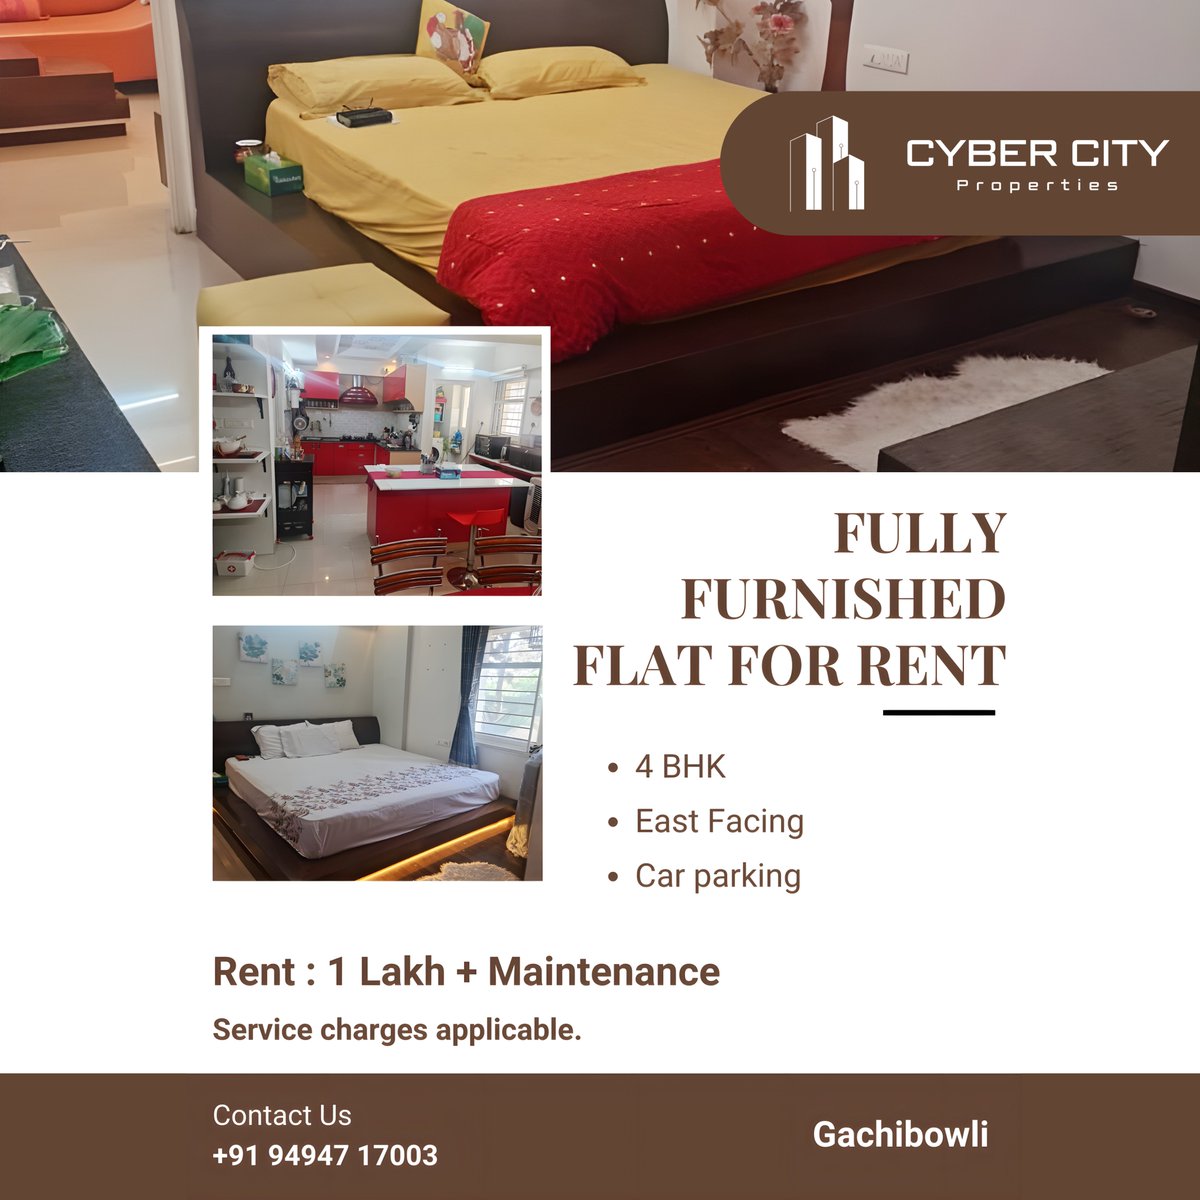 Fully Furnished flat for rent @ Gachibowli
4 BHK
East Facing
Car parking
Rent : 1 Lakh + Maintenance
Service charges applicable.
#hyderabadrealestate #hyderabad #realestate #property #gatedcommunity #realestatehyderabad #luxuryhomes #ongoingproject #villas #openplots